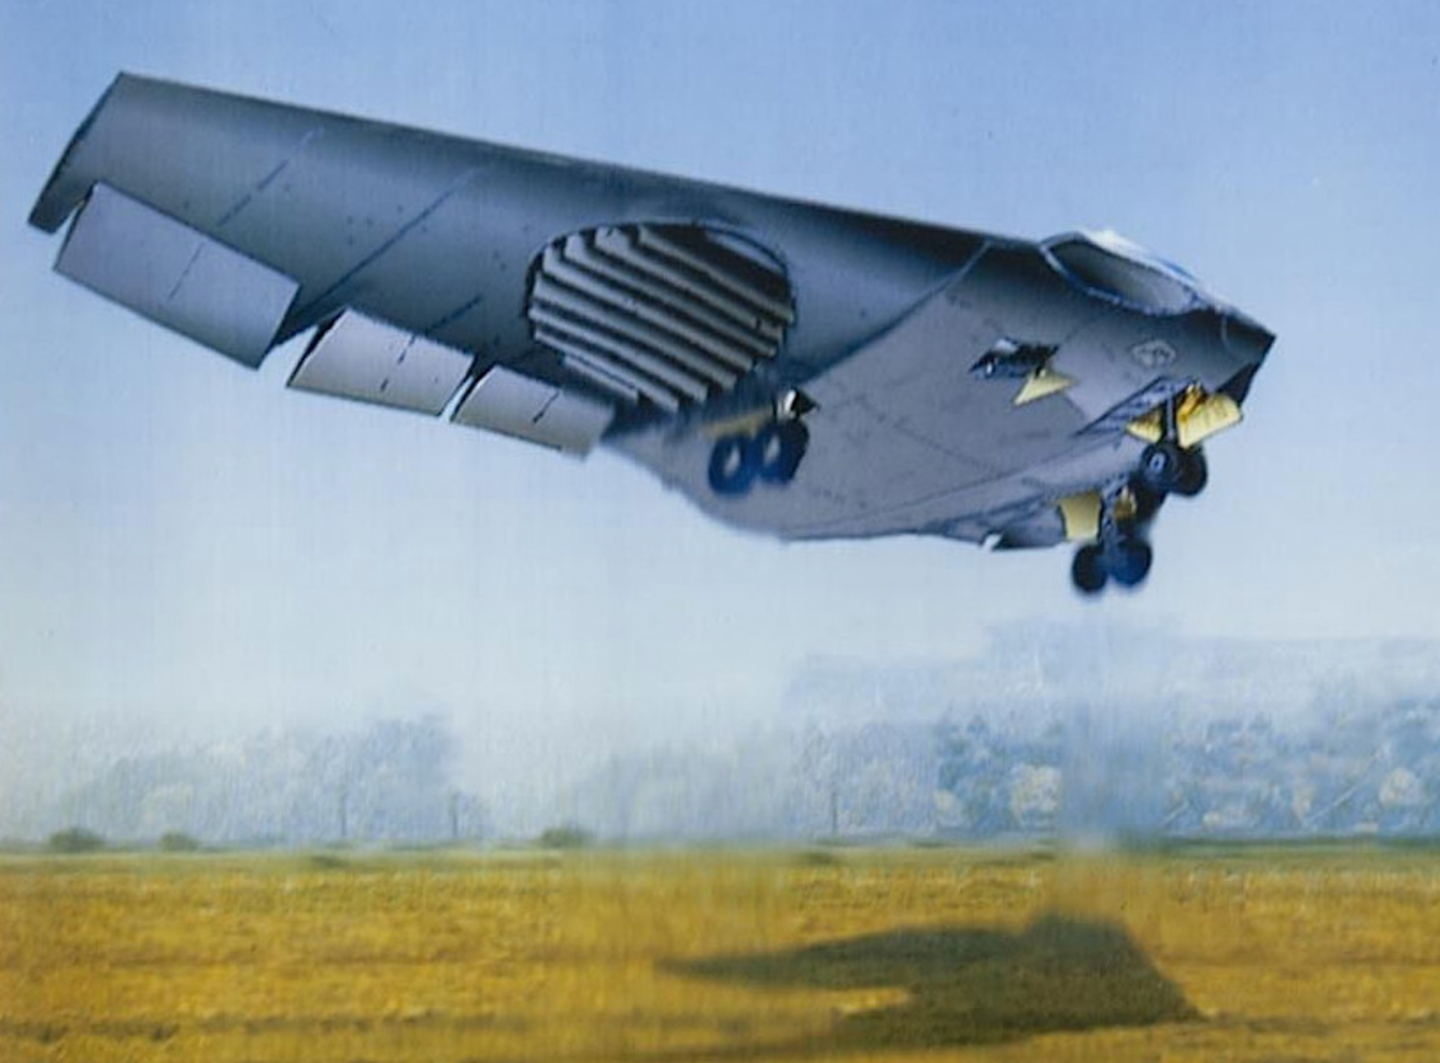 Concept artwork for the Lockheed Special Operations Forces Transport (SOFA), dating from the 1980s. <em>Lockheed <a href="https://www.ebay.com/itm/LOCKHEED-SKUNK-WORKS-X-33-VENTURE-STAR-4-X5-COLOR-TRANSPARENCY-01-/272772819820?oid=272773061159">via eBay</a></em>